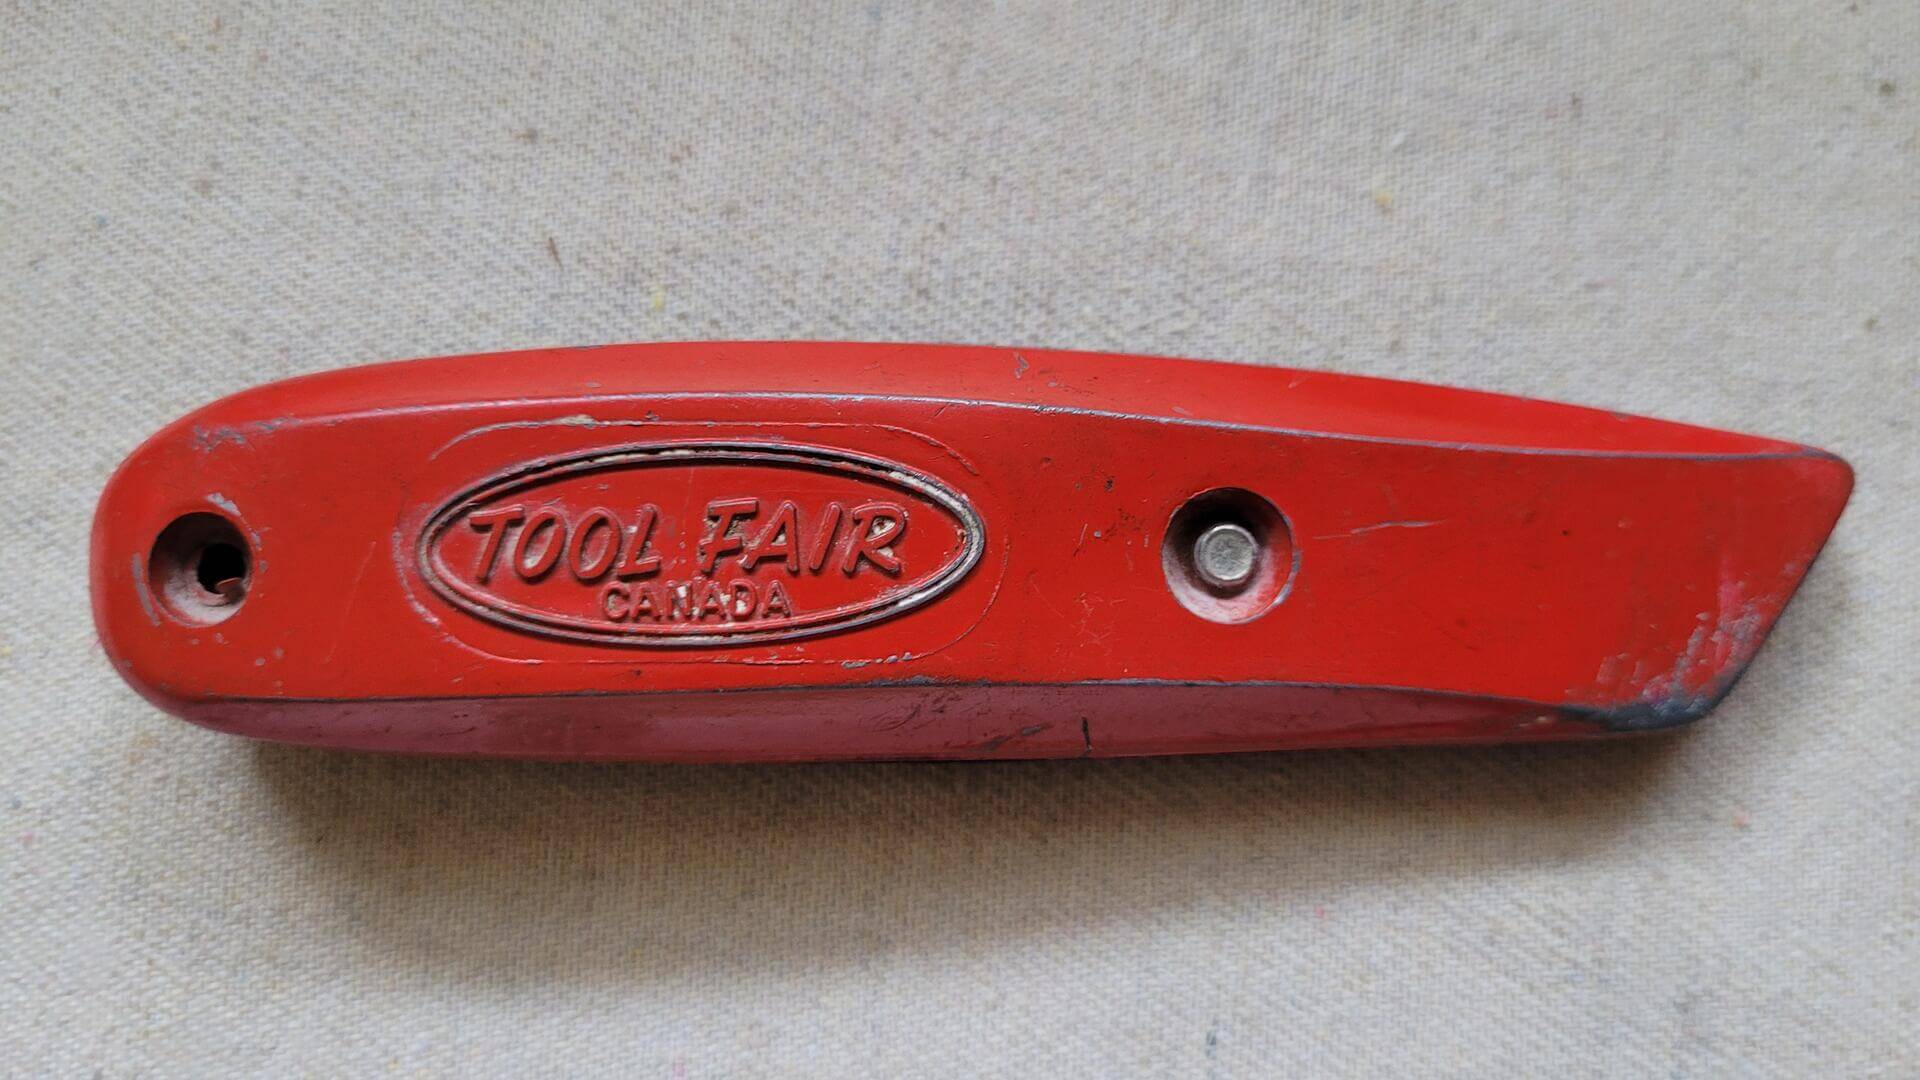 Rare Vintage Tool Fair Canada Metal Utility Knife Box Cutter - Canadiana collectible handyman antique hand tools